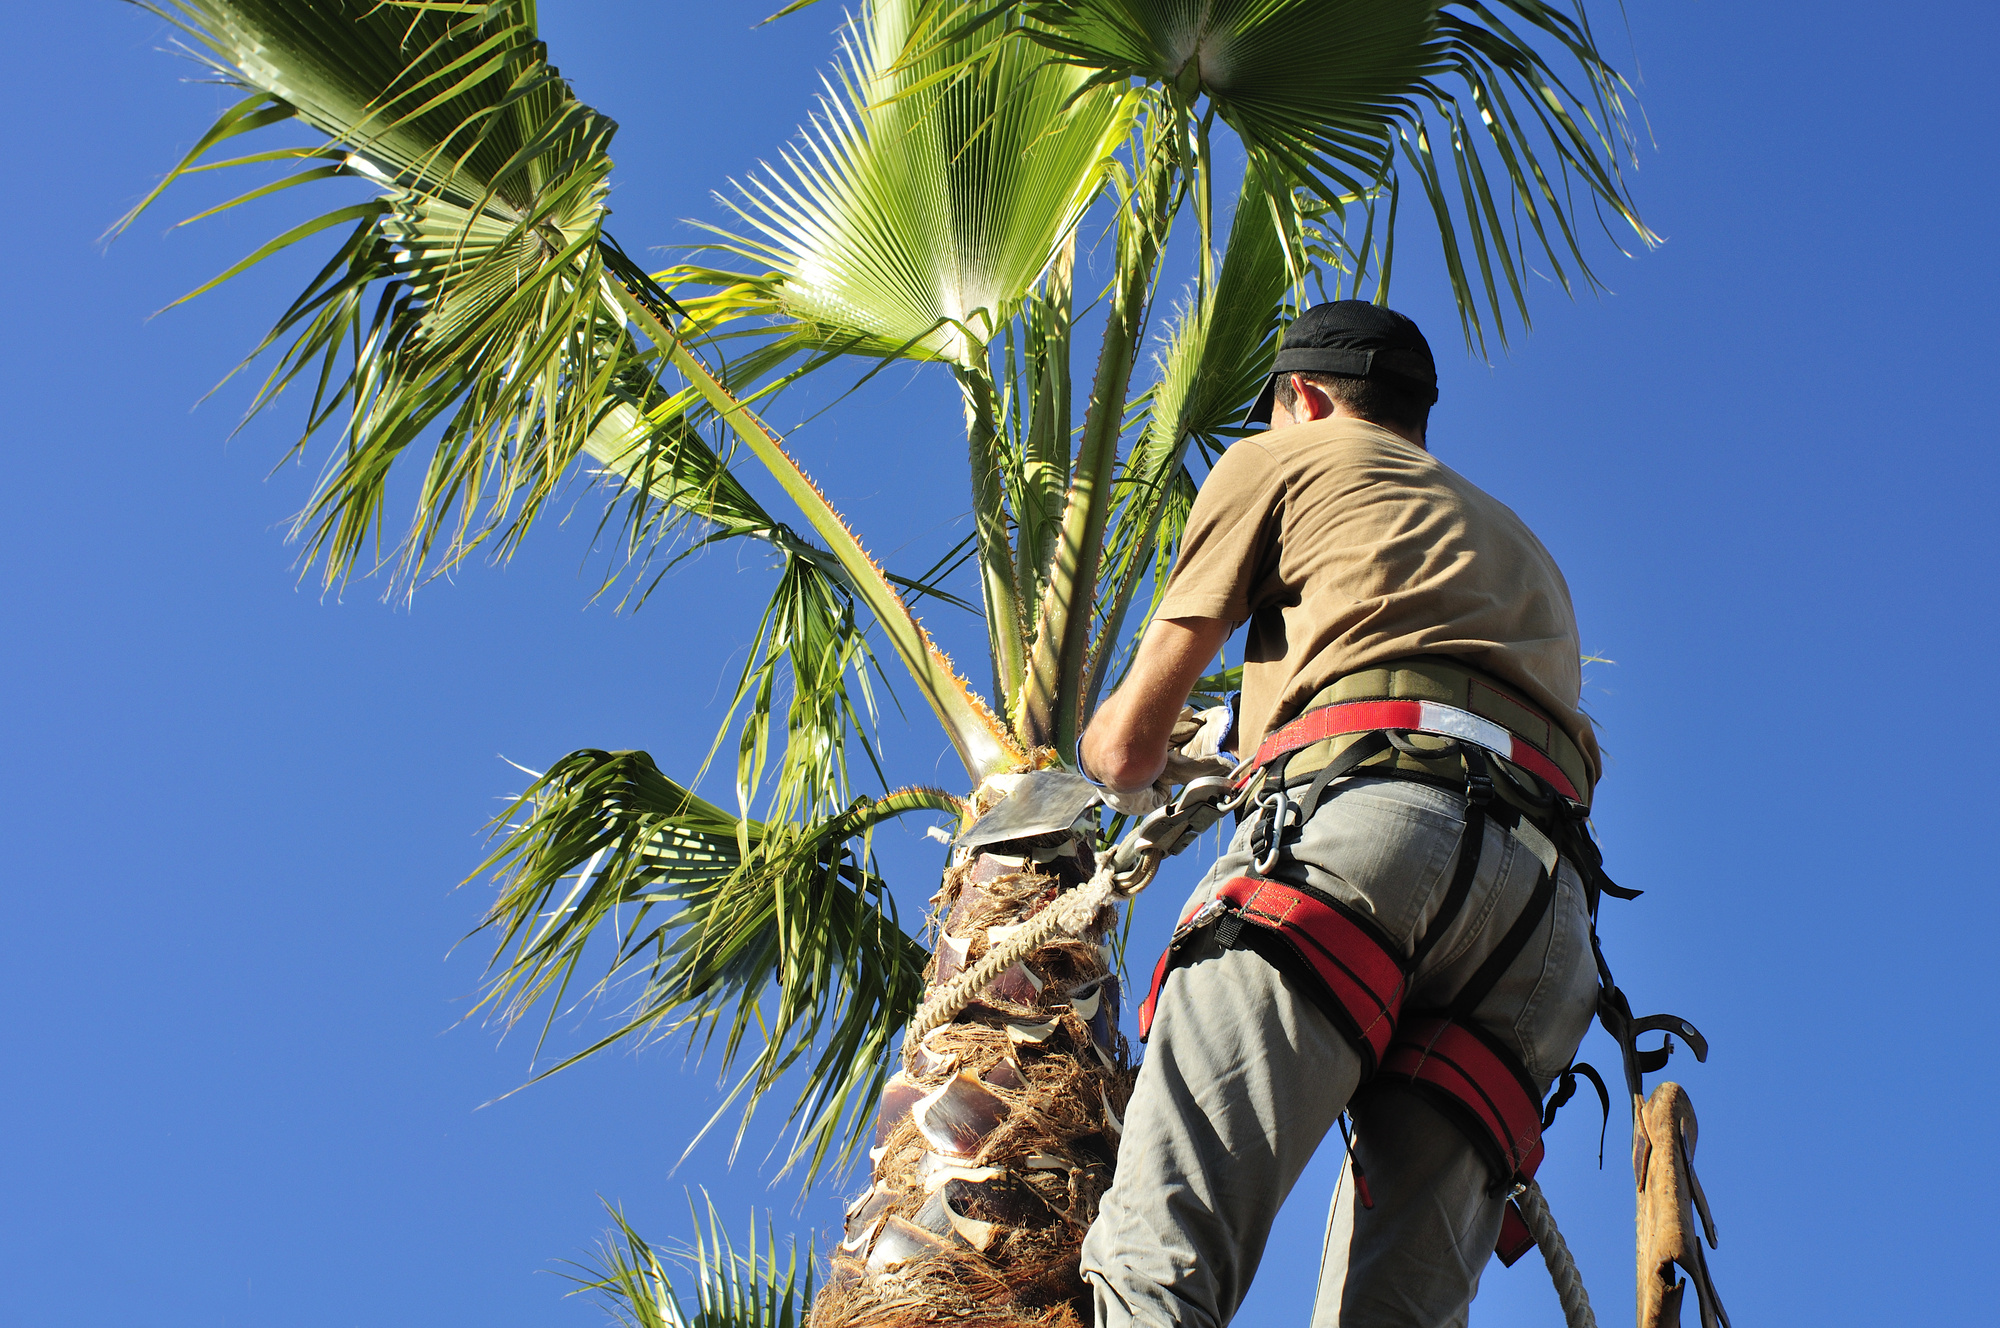 Tree service professional in harness trimming palm tree